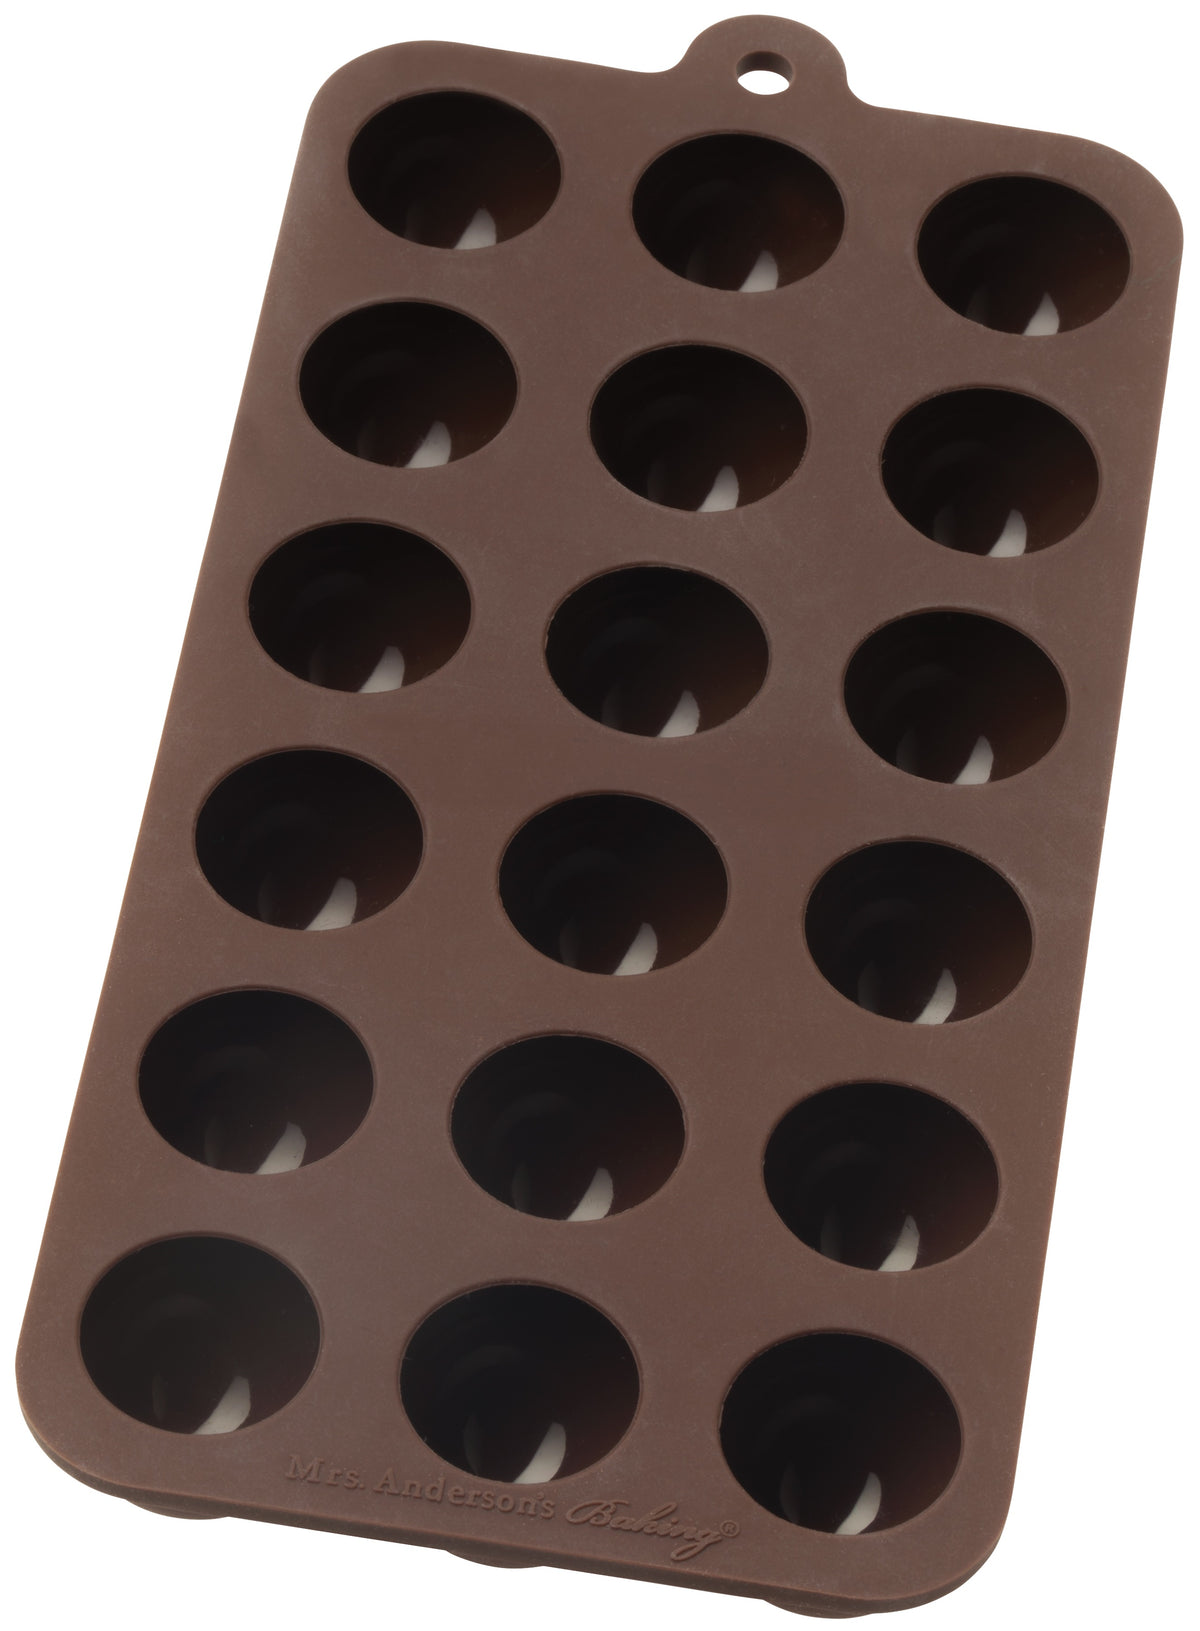 Mrs. Anderson's 43763 Truffle Chocolate Mold, Brown